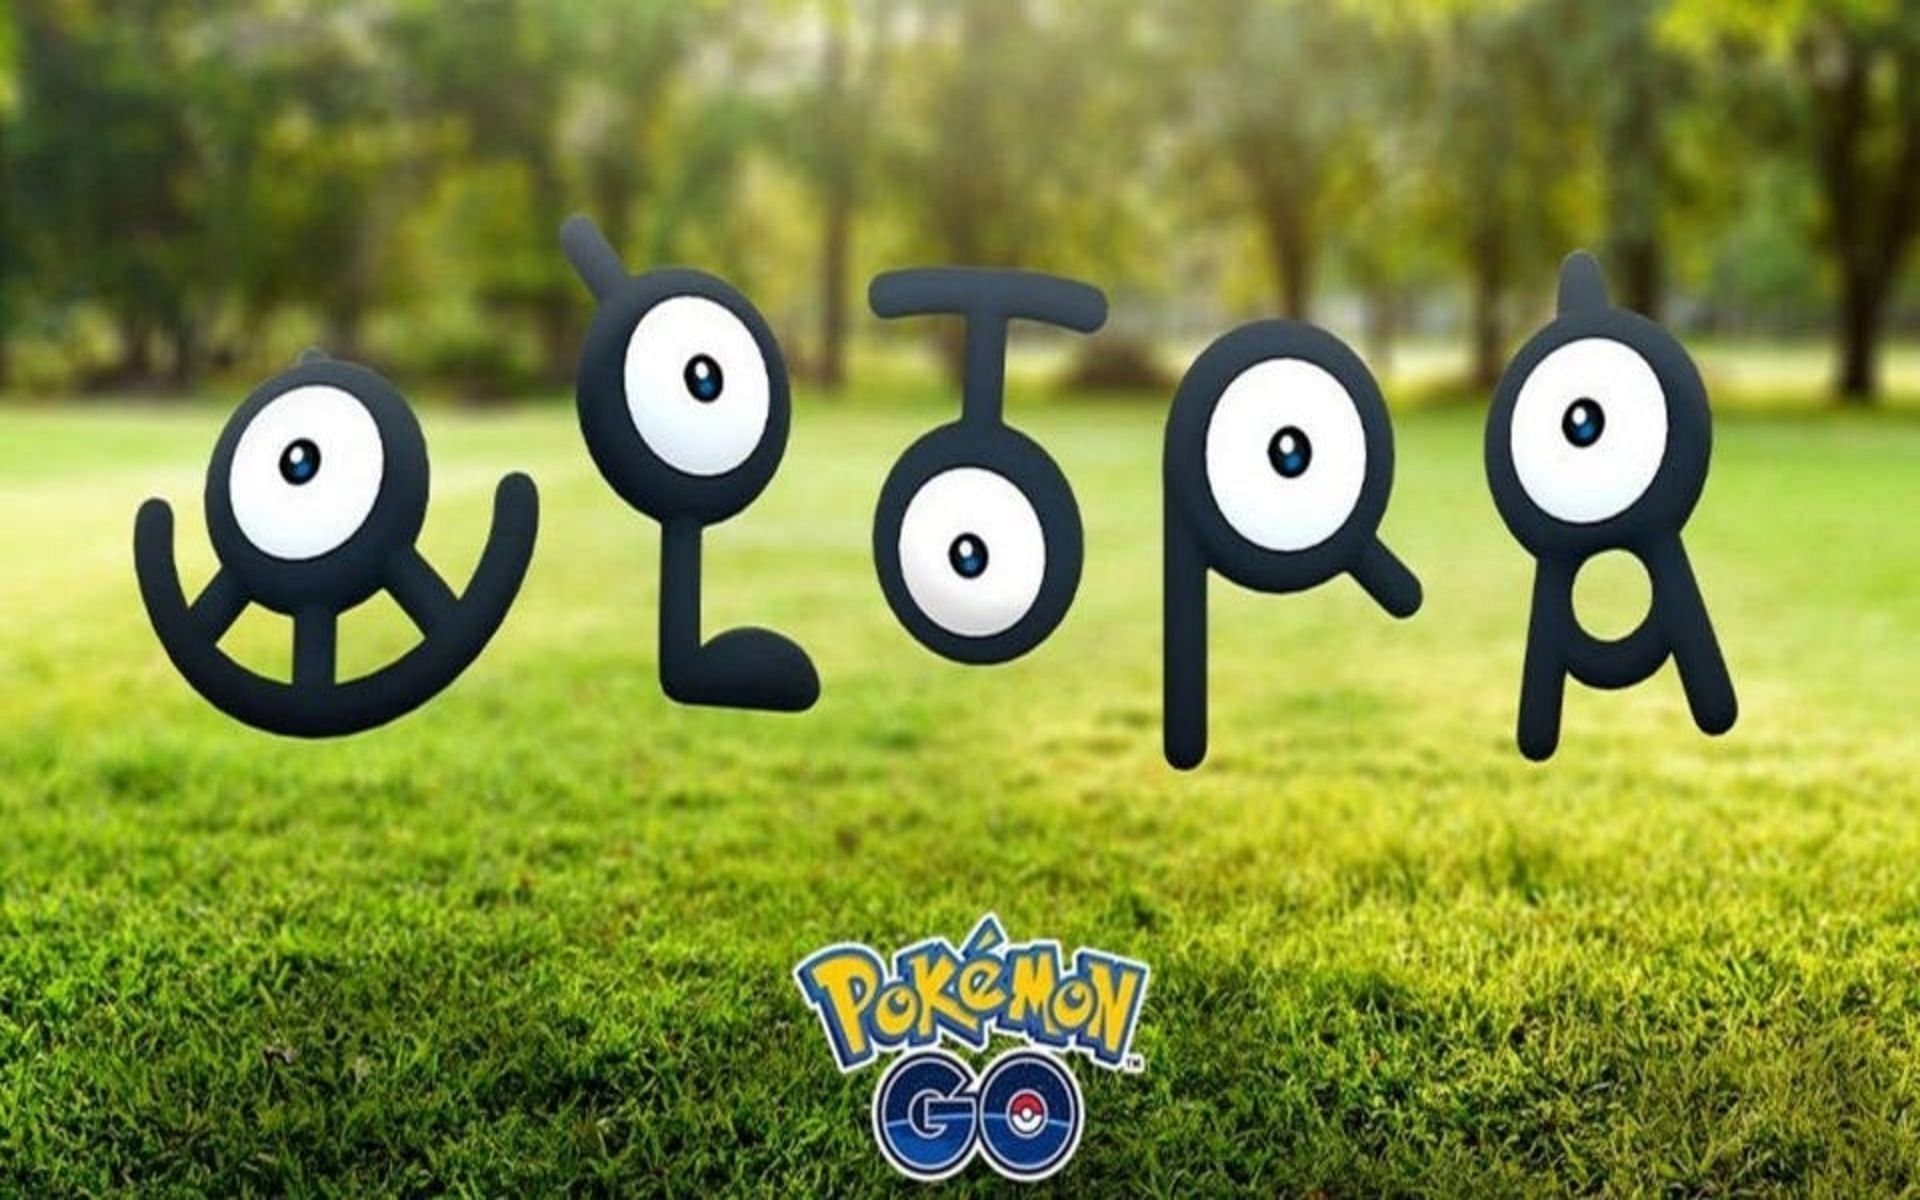 HOW EASILY CAN YOU CATCH EVERY LETTER OF UNOWN (IN EVERY GAME)? 